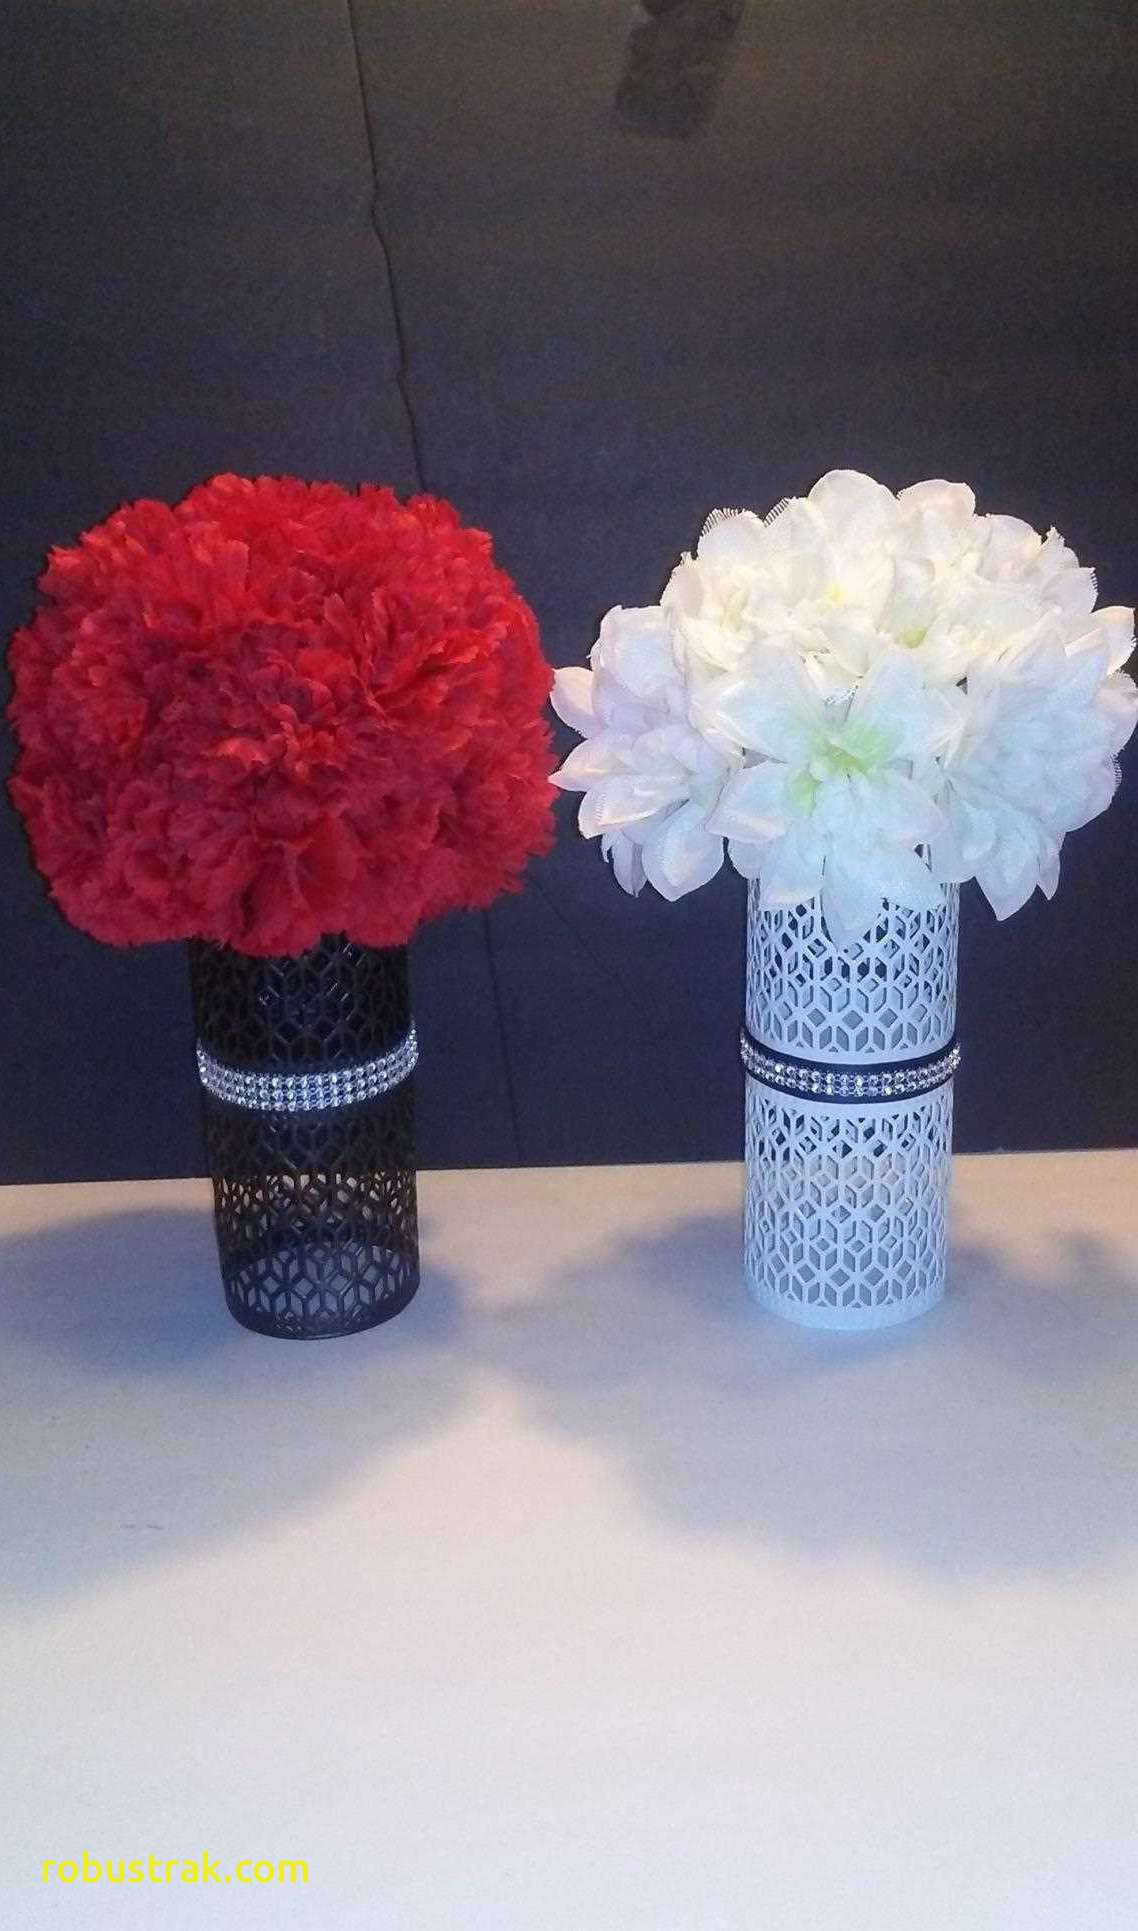 19 Lovable Rustic Wood Flower Vases 2024 free download rustic wood flower vases of beautiful wedding vase decorations home design ideas throughout dollar tree wedding decorations awesome h vases dollar vase i 0d design wedding silk flower